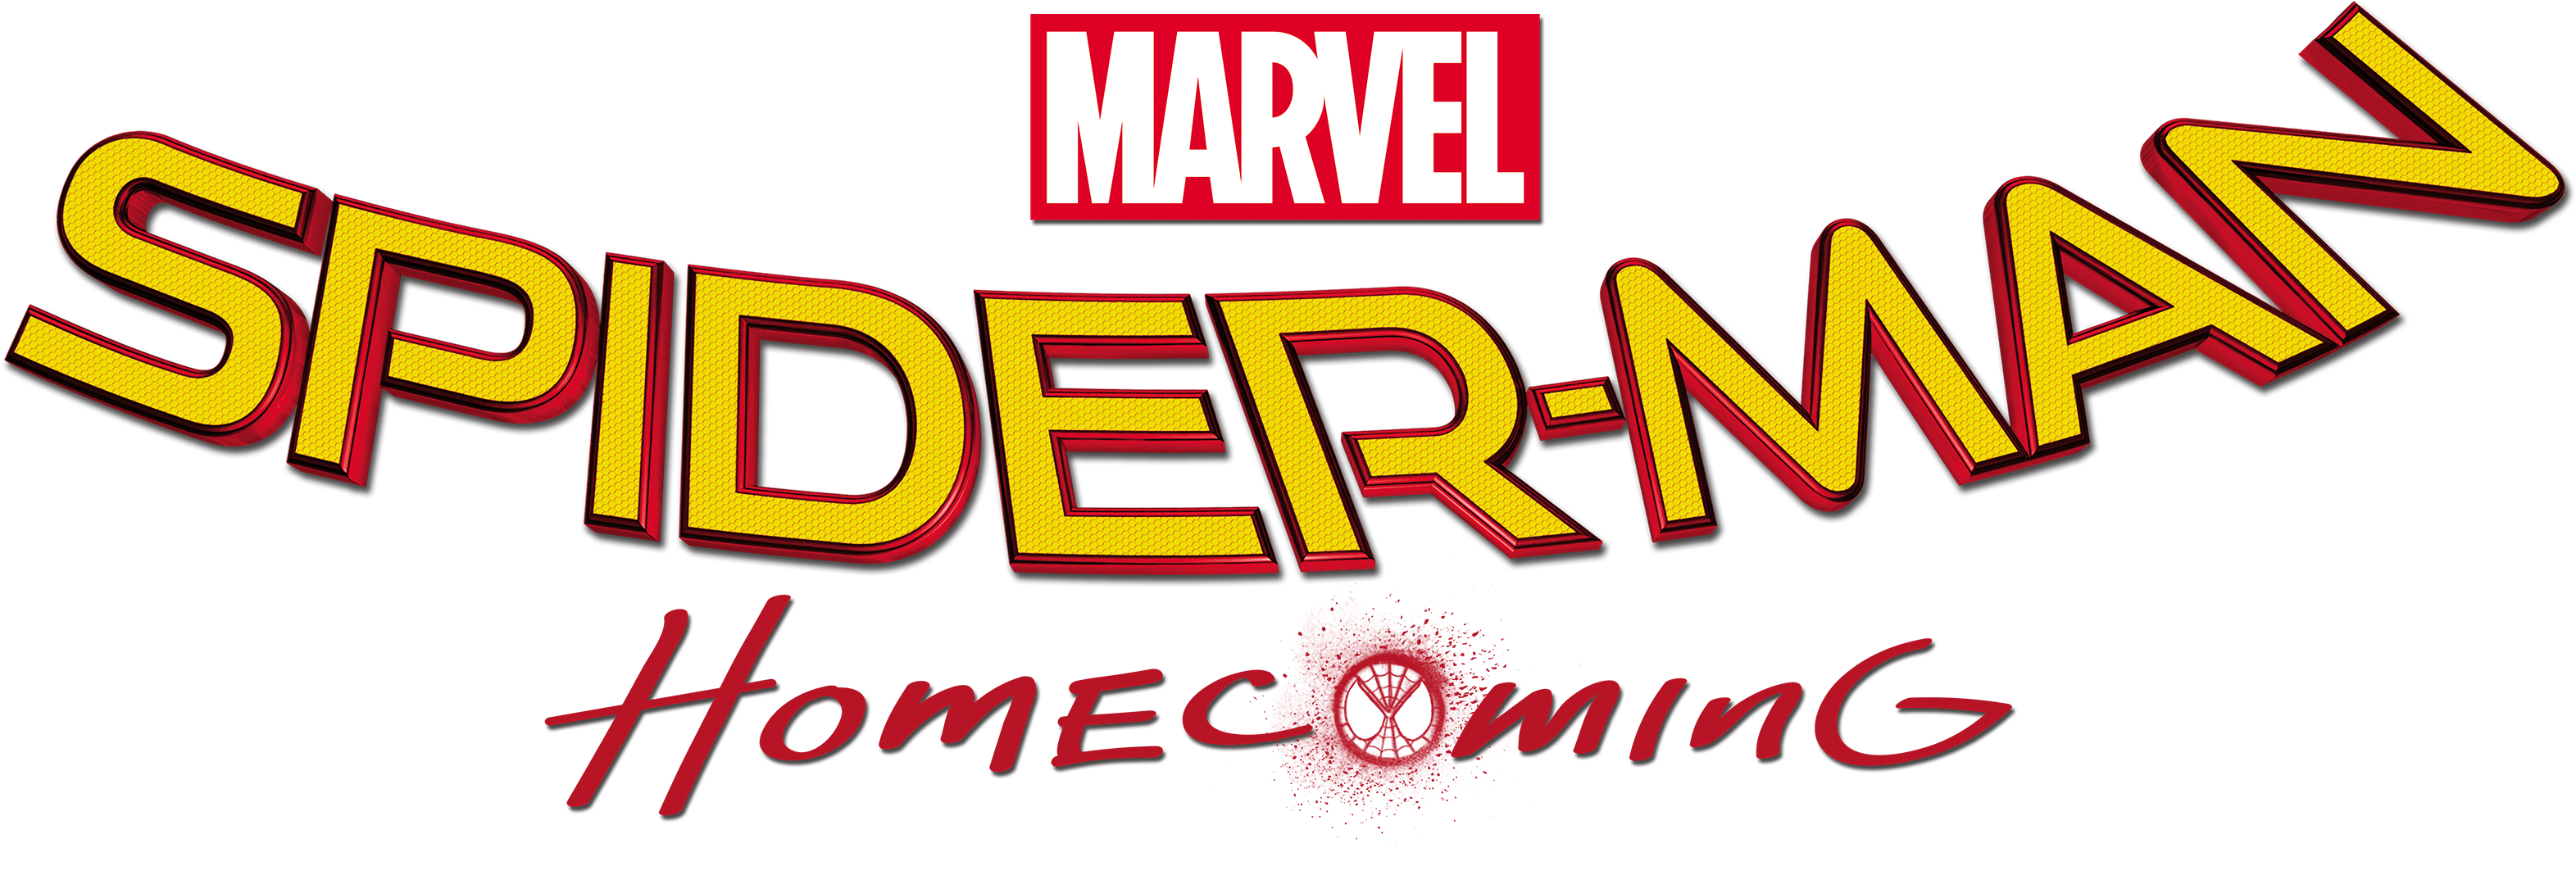 Download Marvel Spider Man Homecoming - Spiderman Homecoming Movie Logo PNG  Image with No Background 